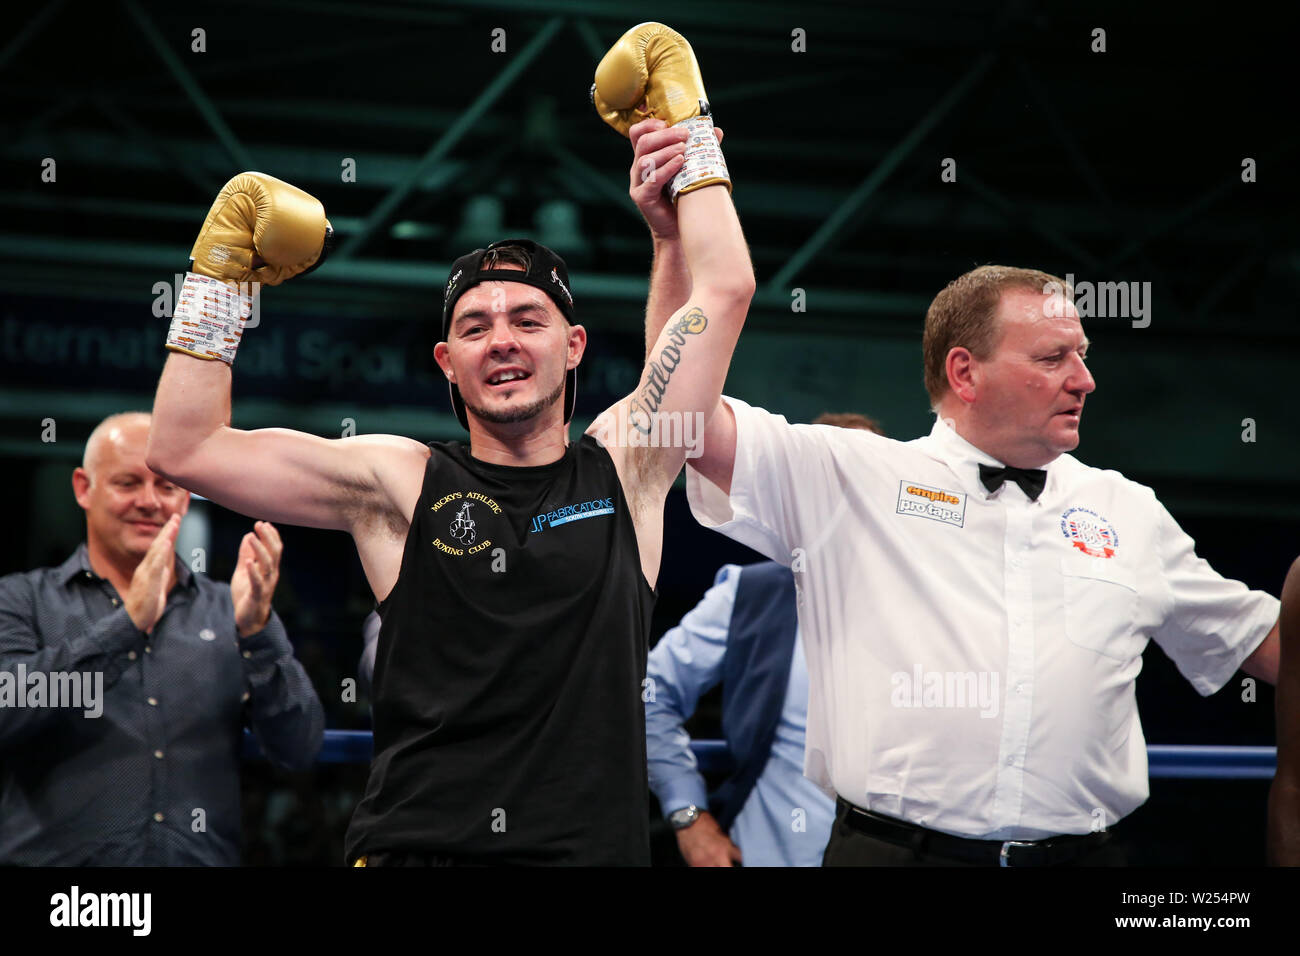 Josh Wale celebrates knocking out Ekow Wilson during the Dennis Hobson Promotions at Ponds Forge, Sheffield. Picture date: 5th July 2019. Picture cred Stock Photo